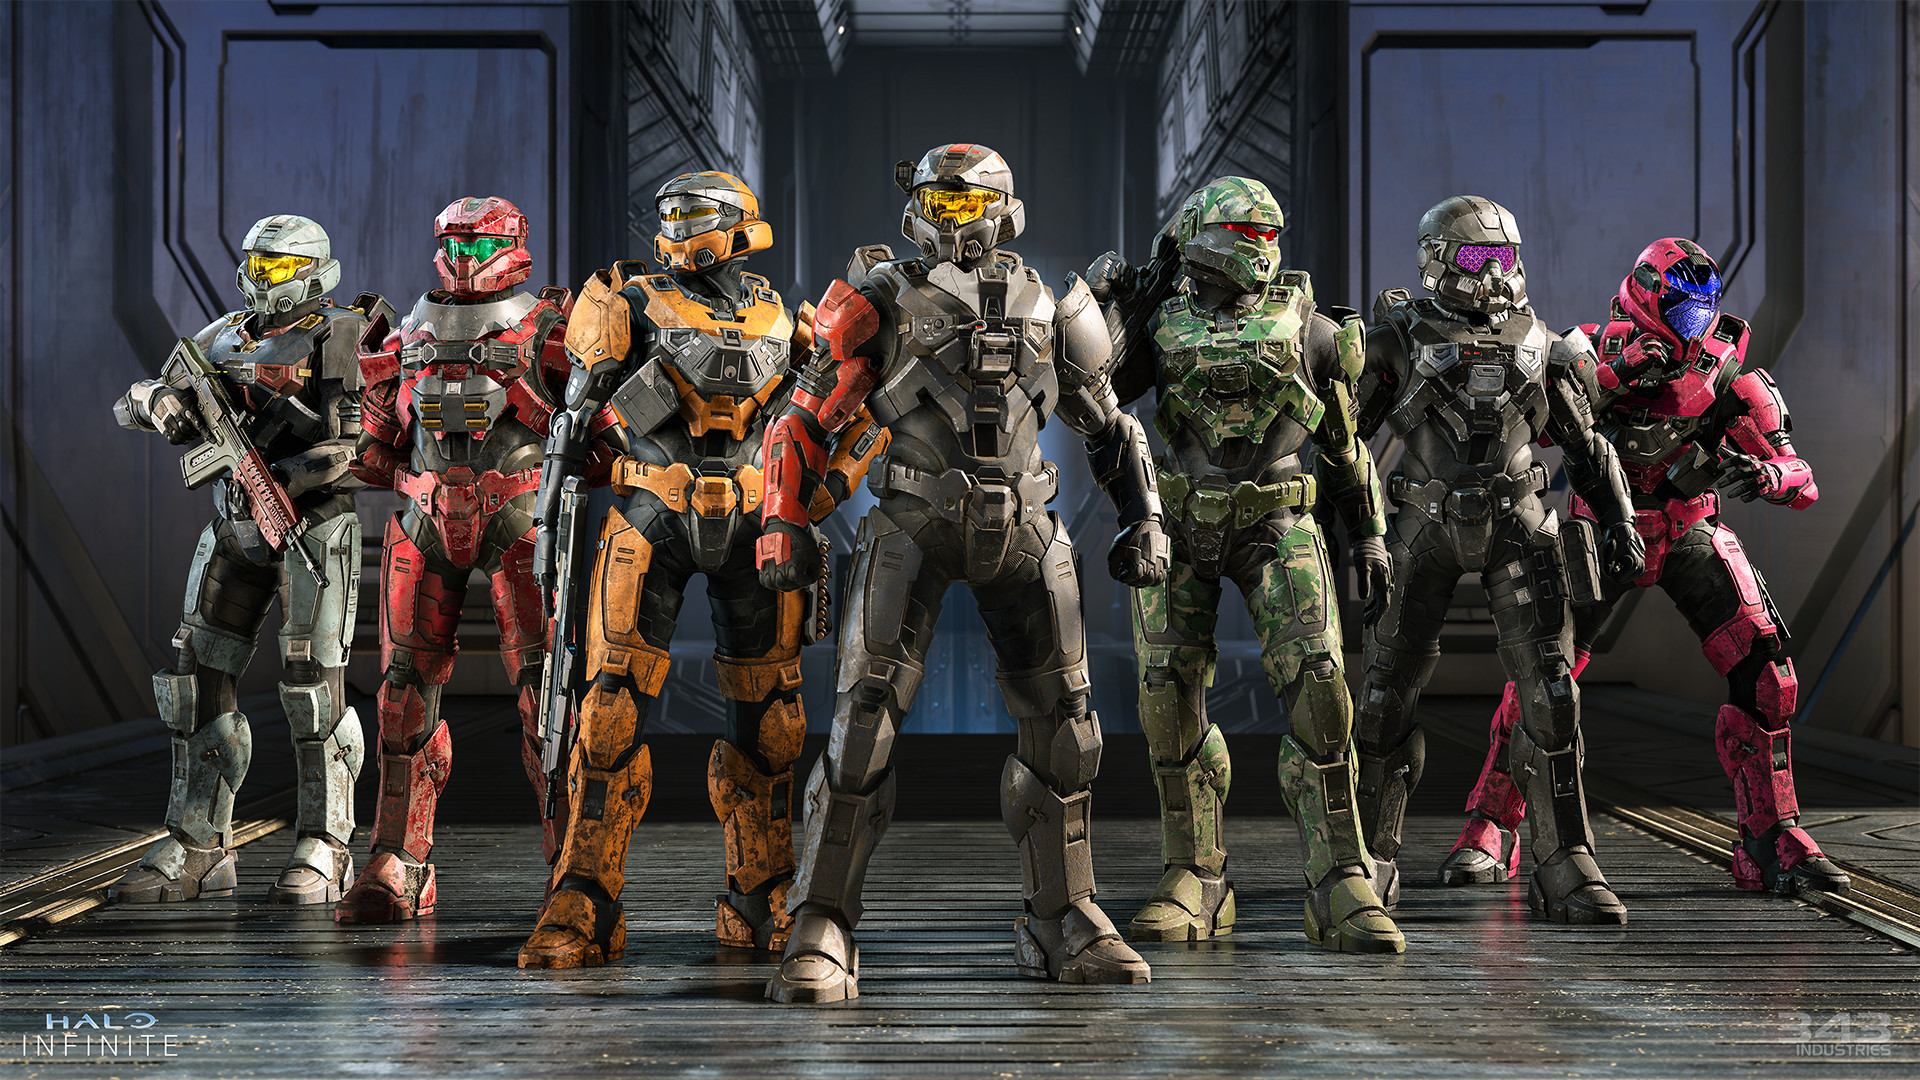 Seven armed Spartans pose for a glamour shot in Halo Infinite